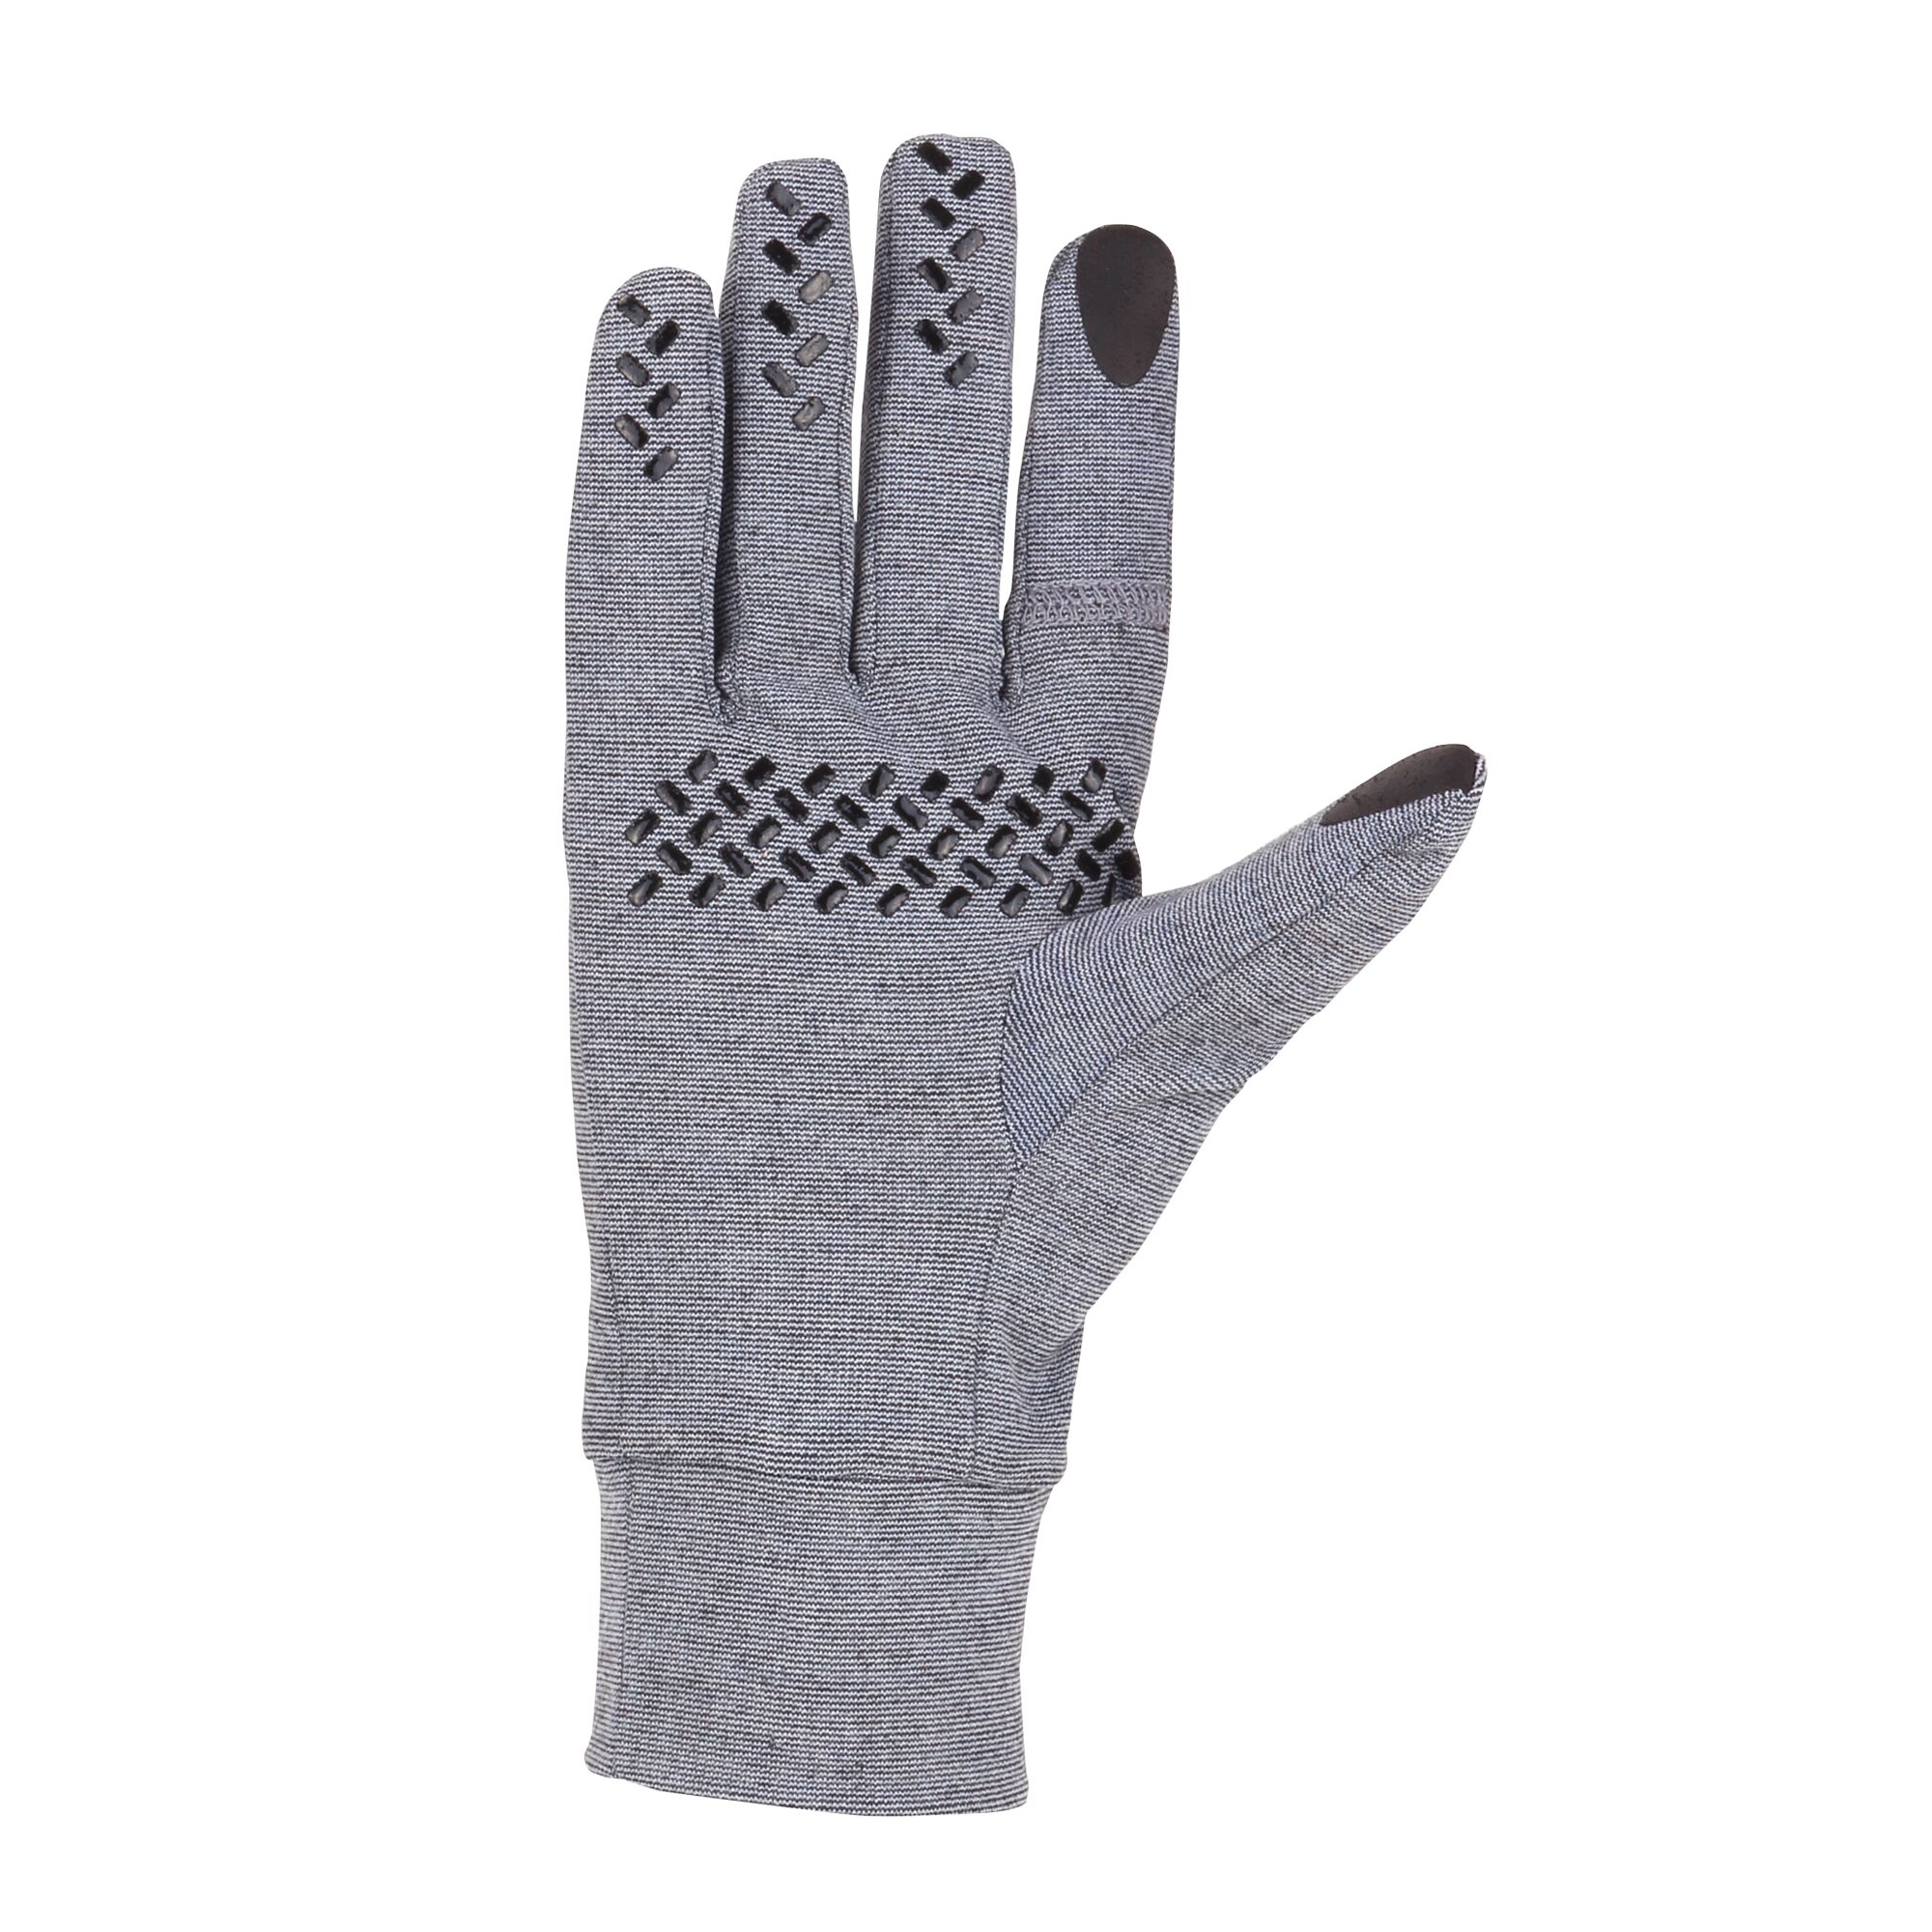 Men's Force Heavyweight Liner Knit Glove in Shadow Heather